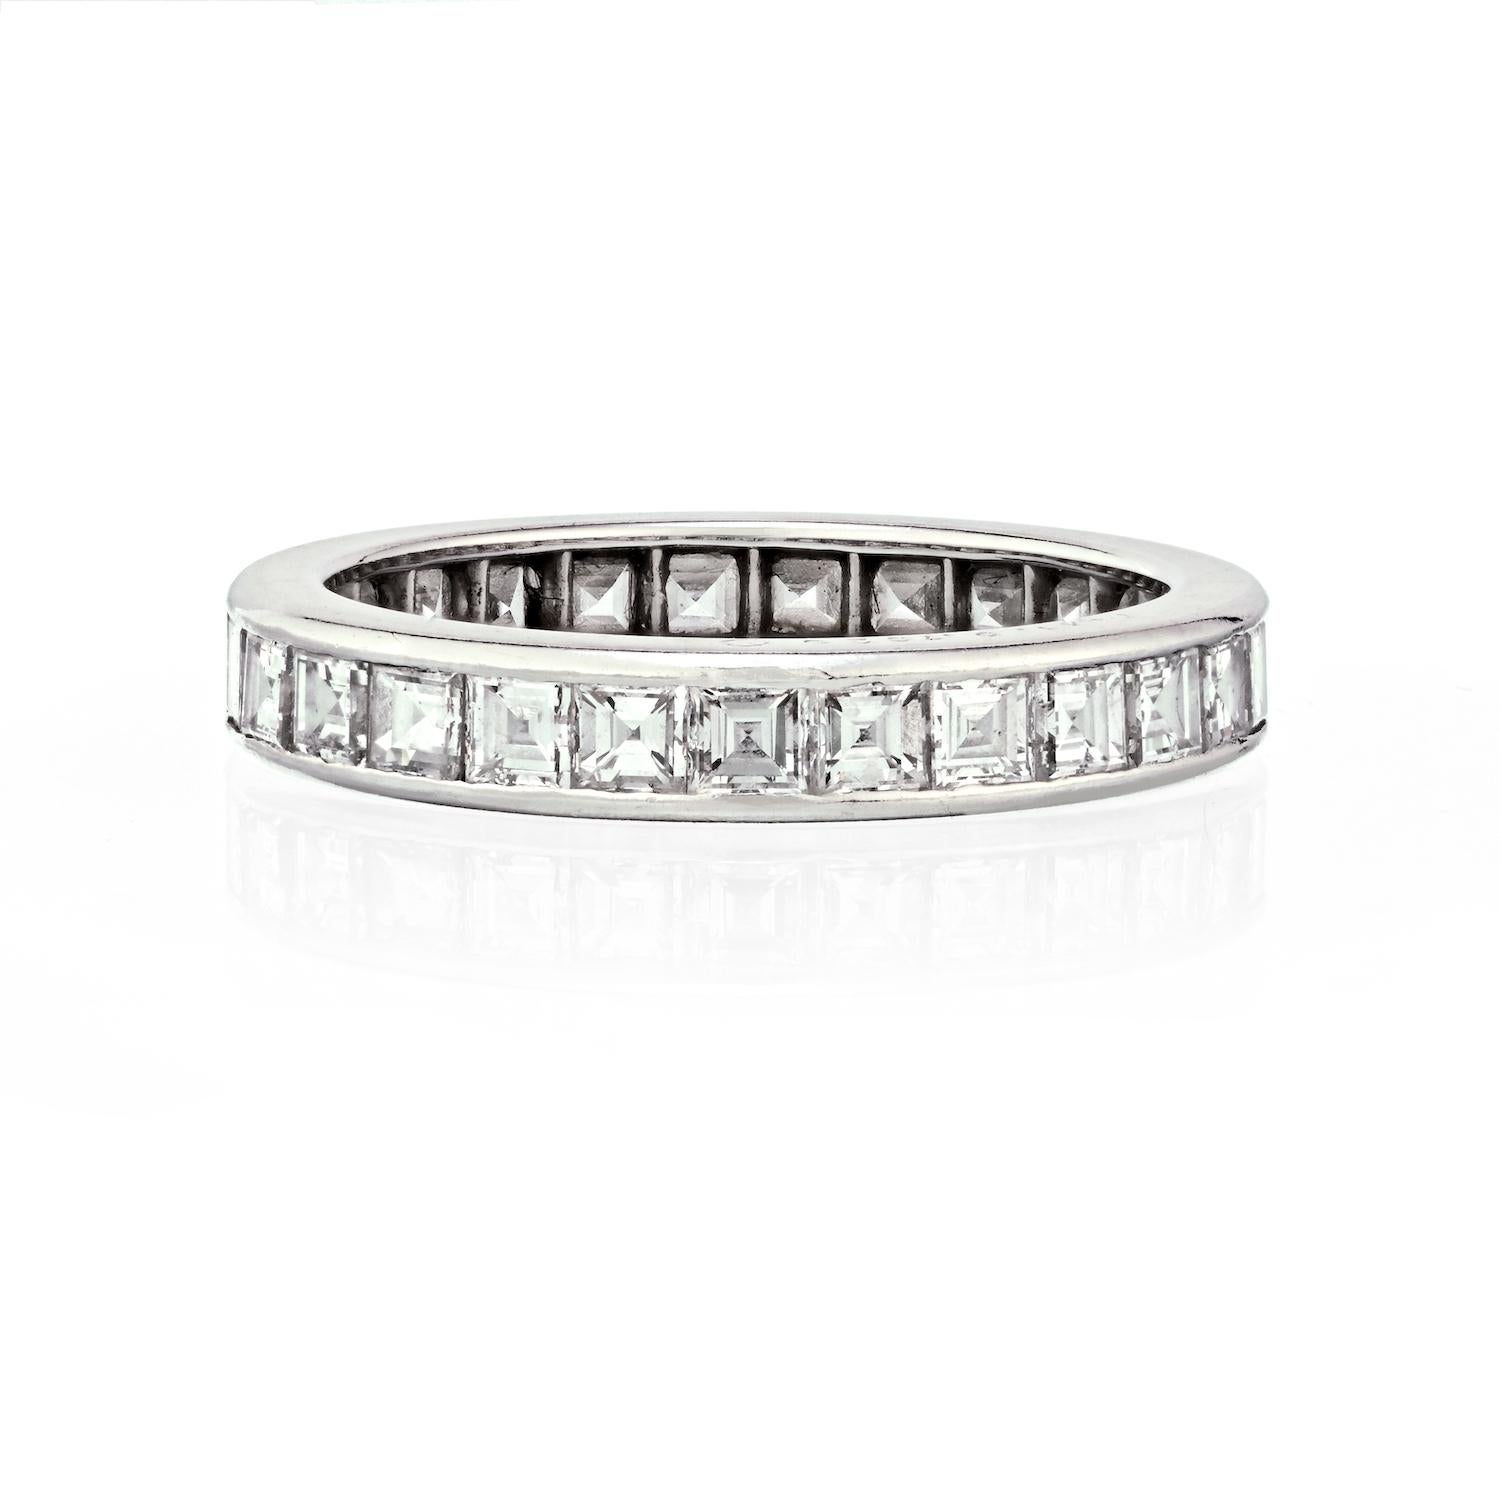 This is a stunning channel set carre cut diamond eternity ring. It is crafted in luxurious platinum, featuring a remarkable channel setting, showcases a dazzling array of carre cut diamonds. 

With a total weight of 4 carats, these diamonds radiate